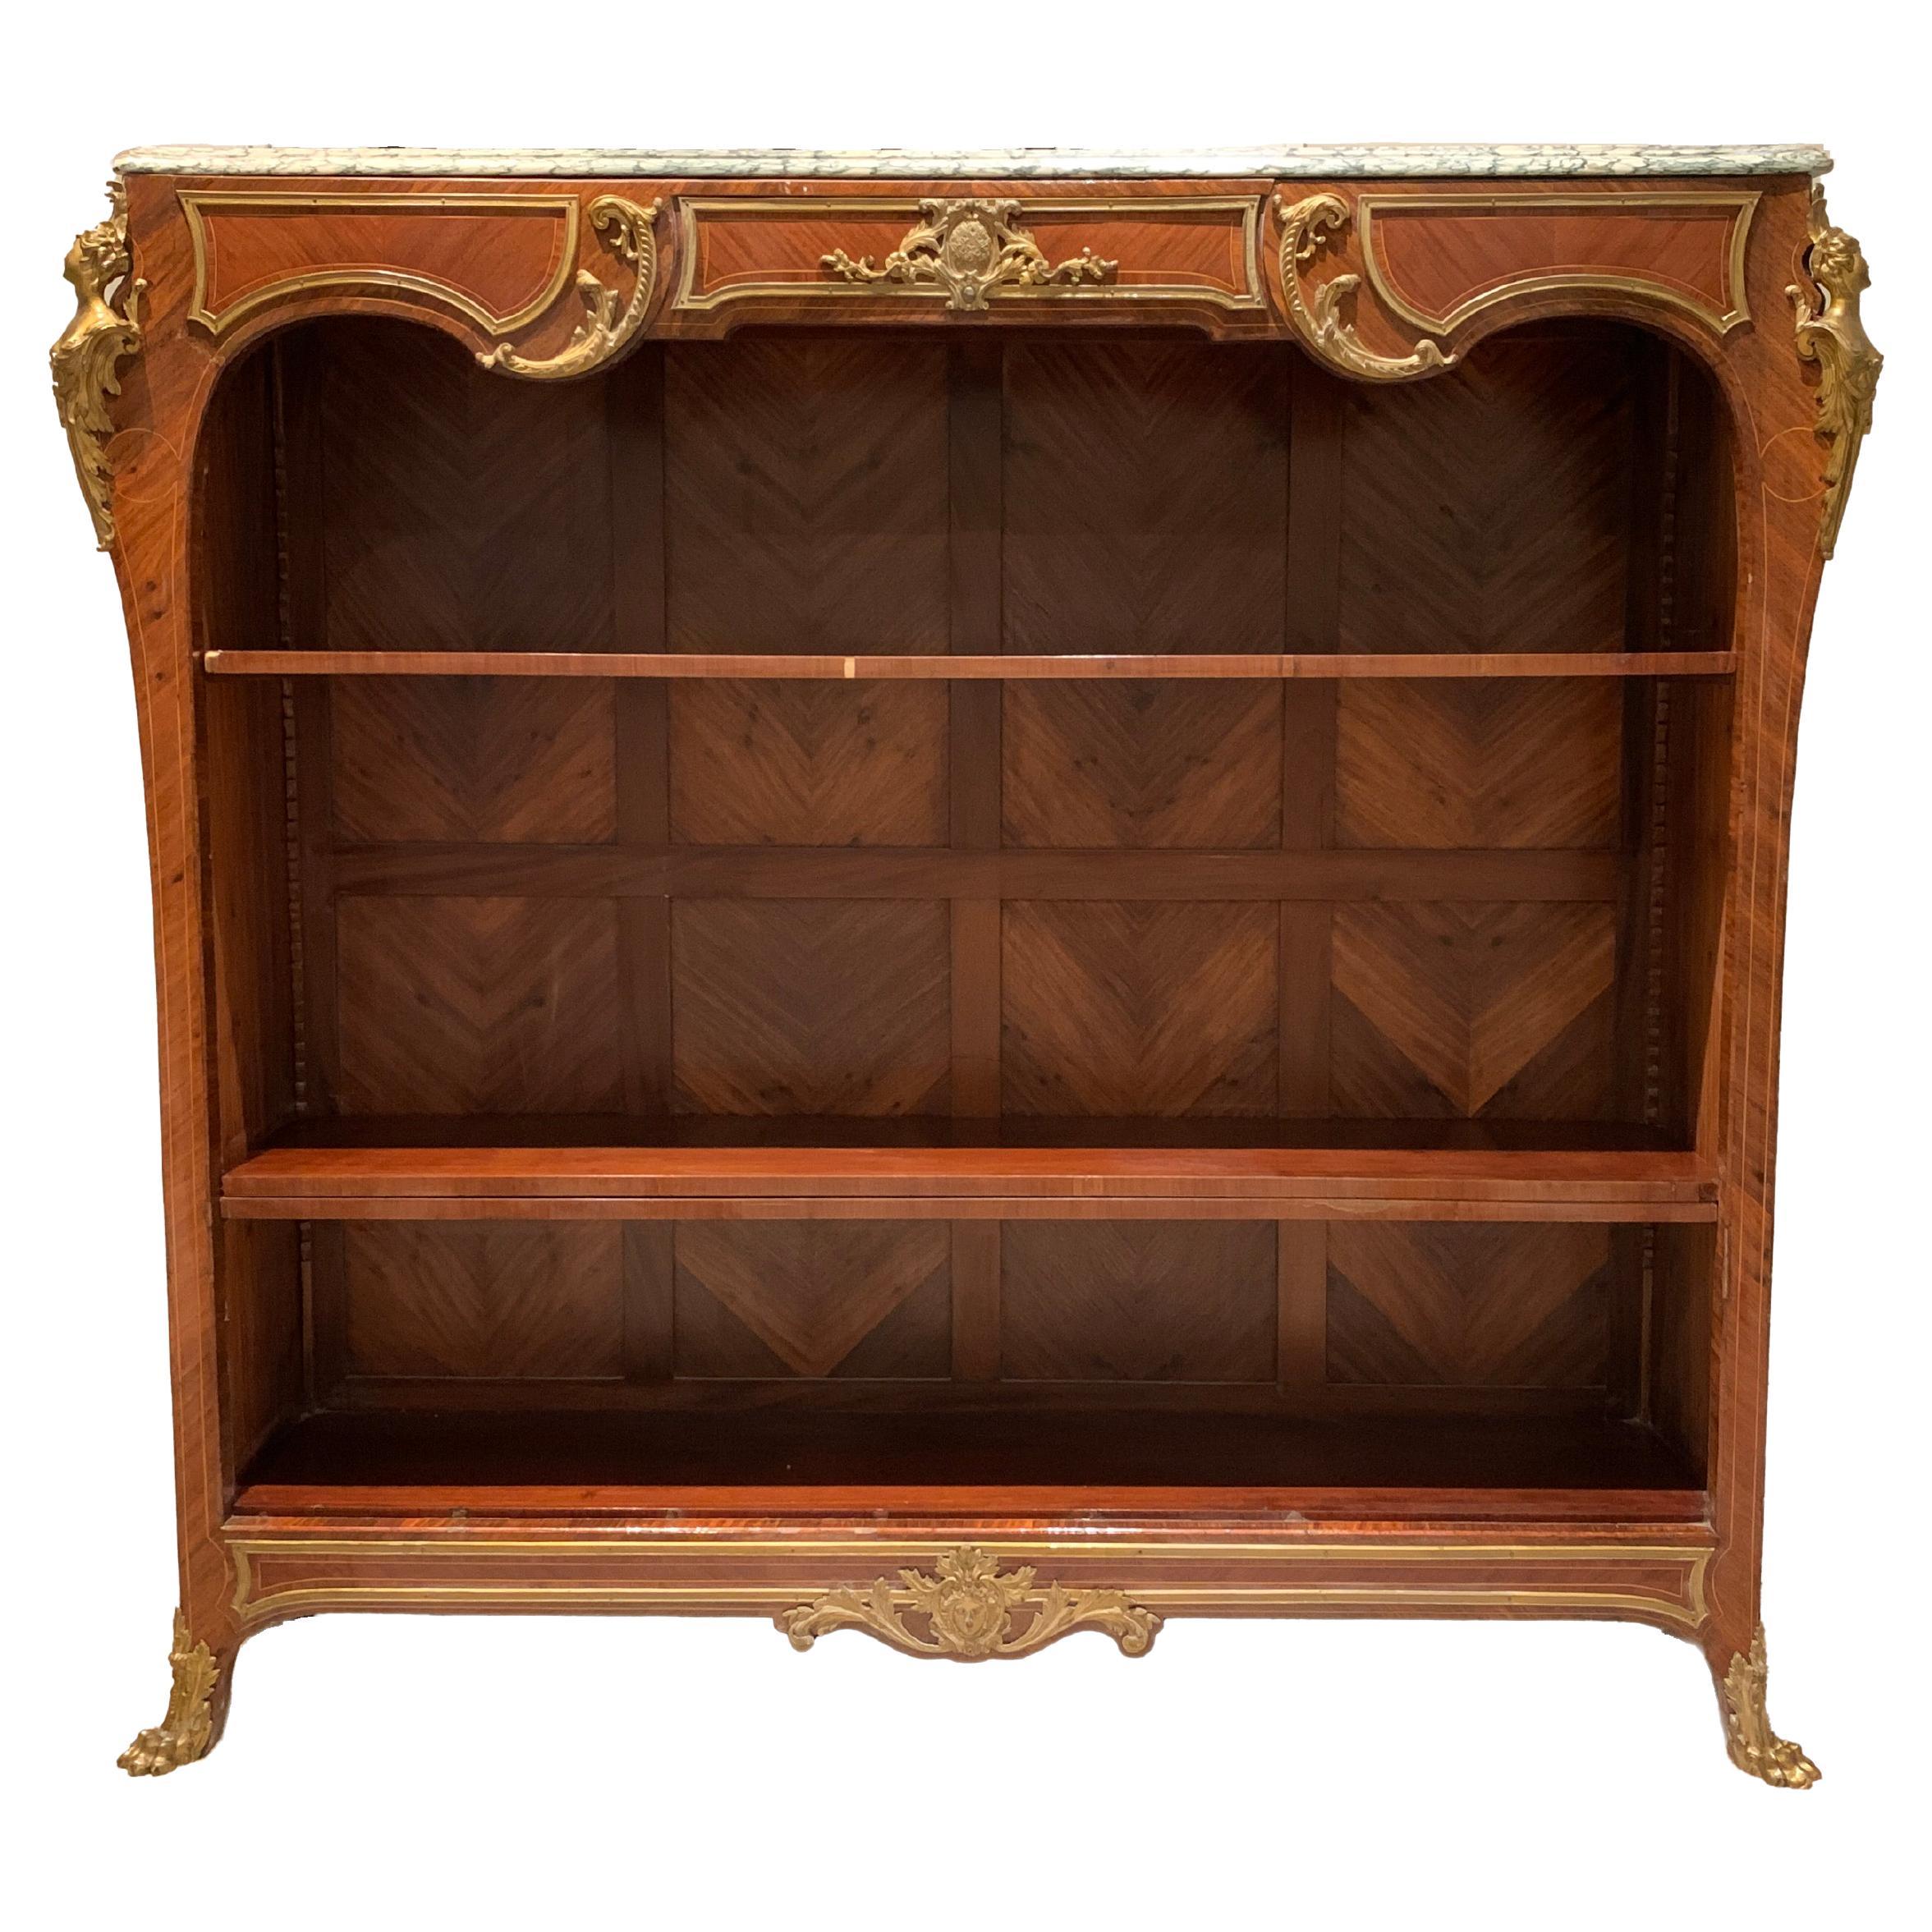 French Ormolu-Mounted Kingwood Bibliotheque For Sale